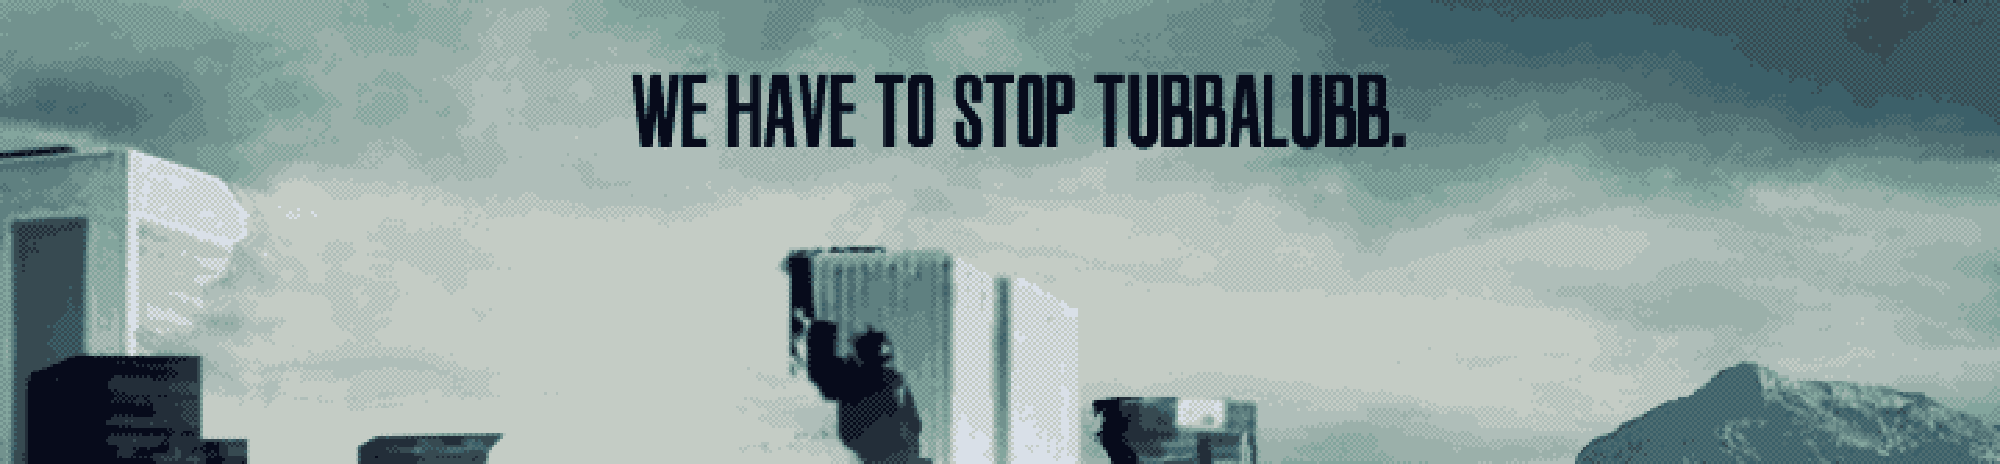 We Have to Stop Tubbalubb